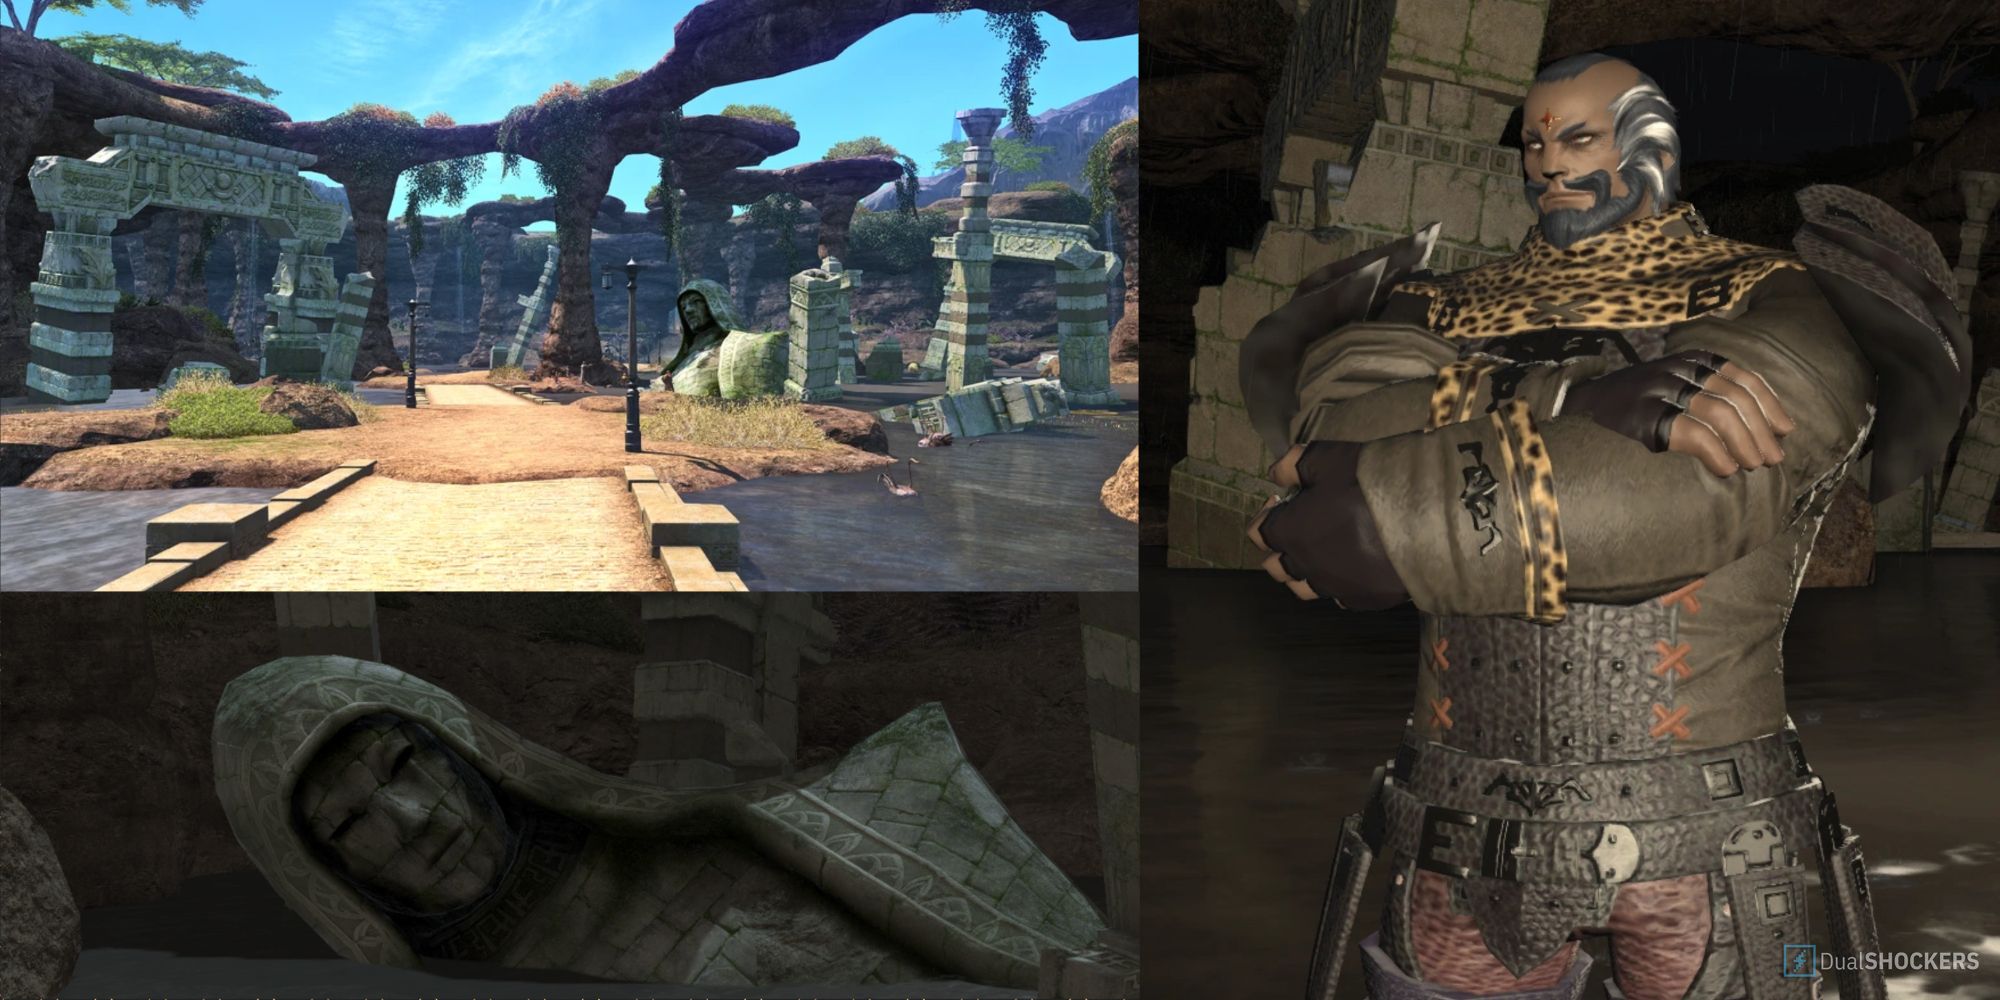 Final Fantasy 14's NPC Valiant Hart in a collage with screenshots of Western Thanalan and a fallen statue